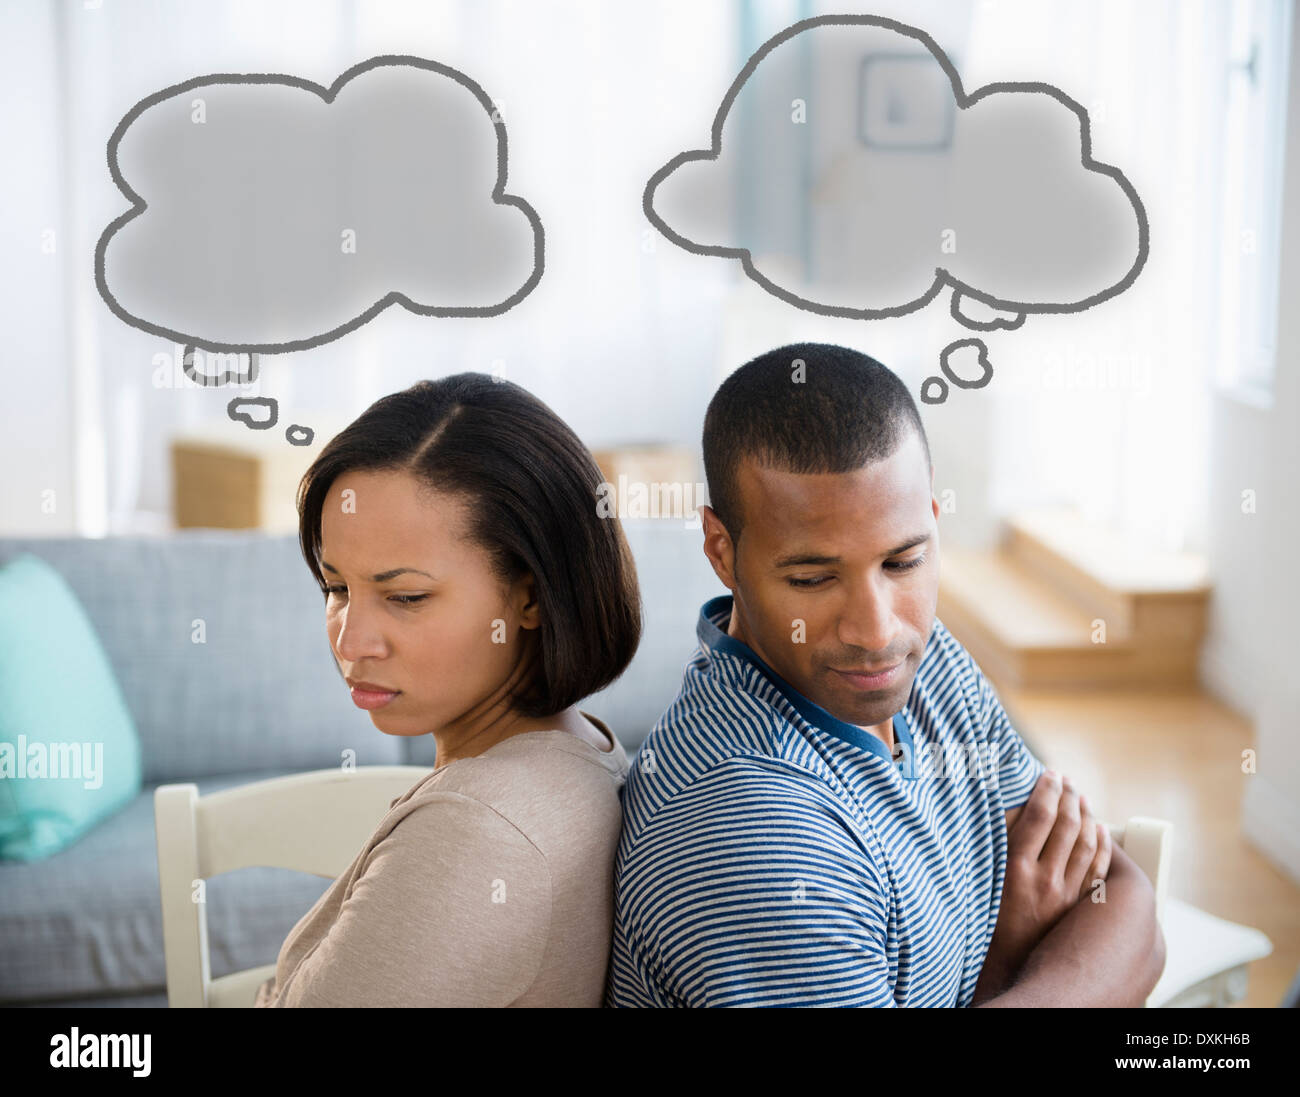 Thought bubbles above frustrated couple Stock Photo